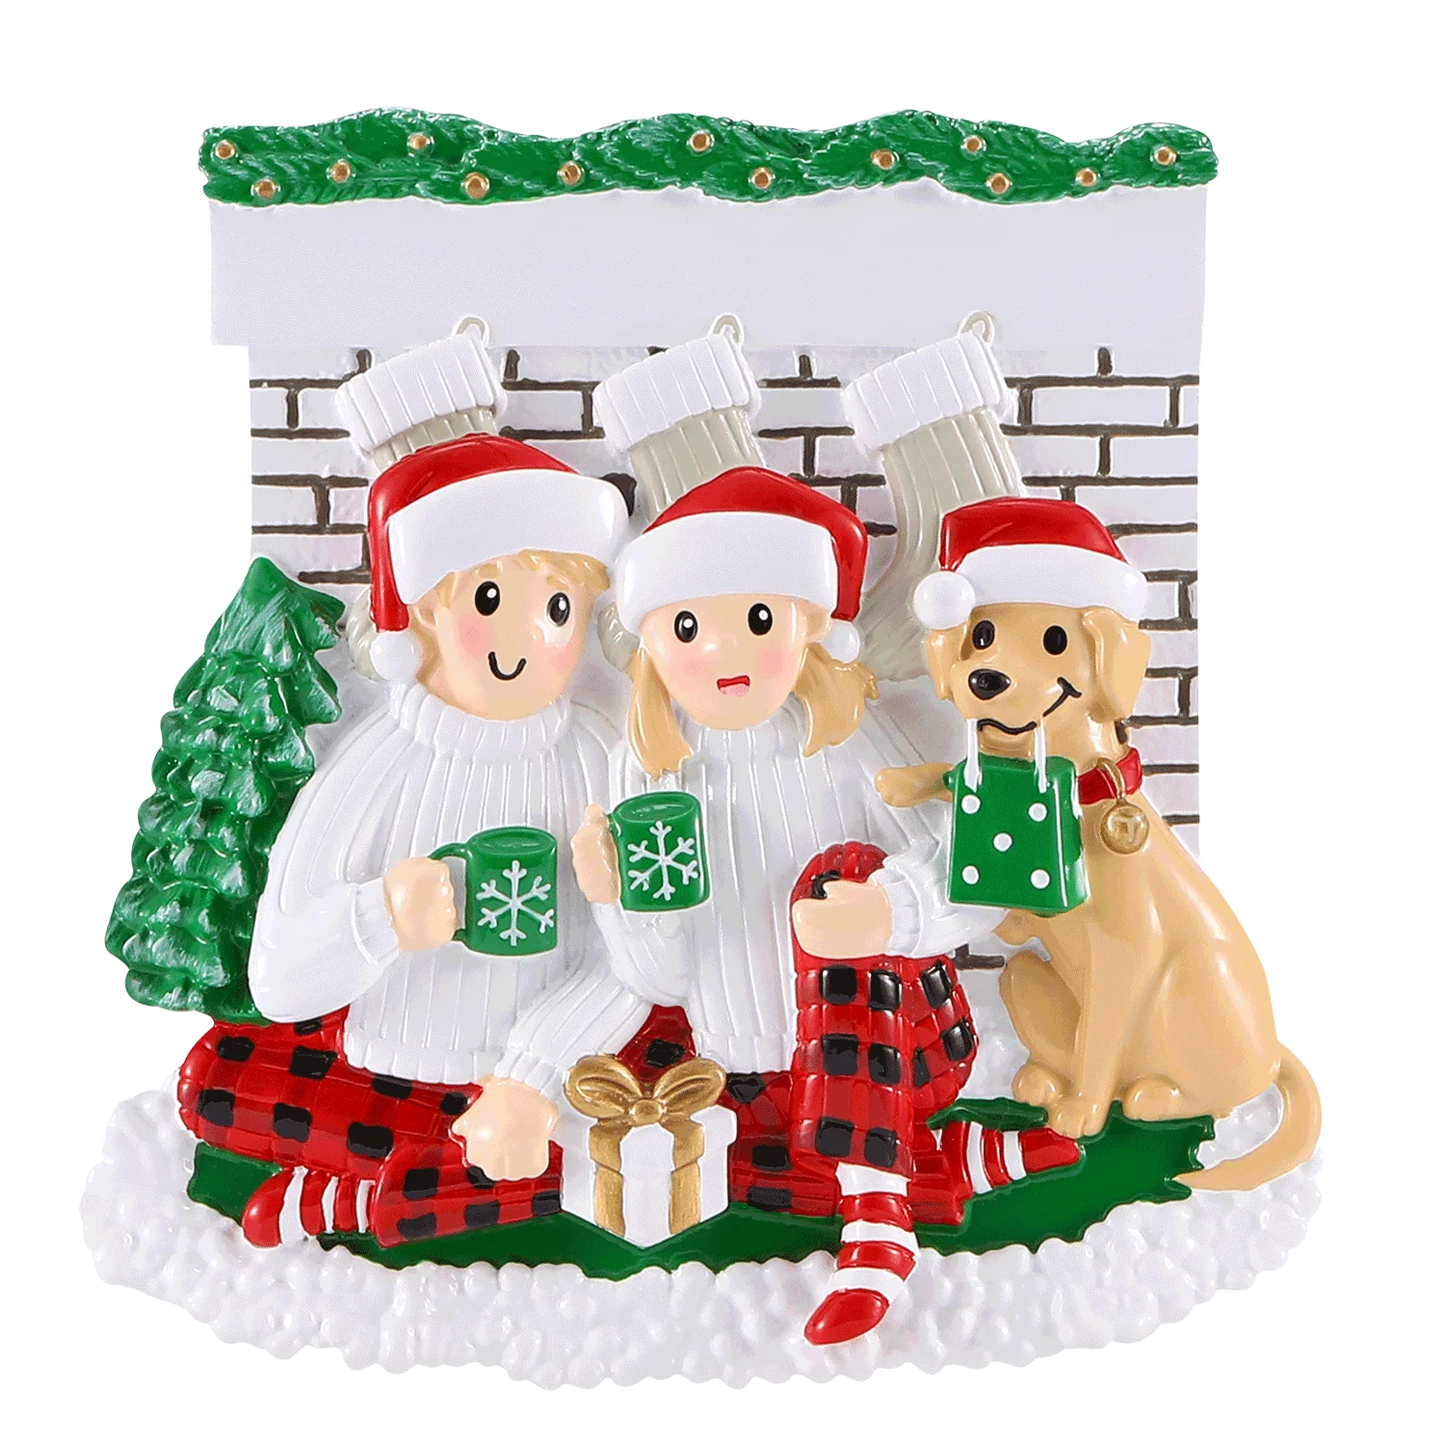 Fireplace Family of 2 Ornament